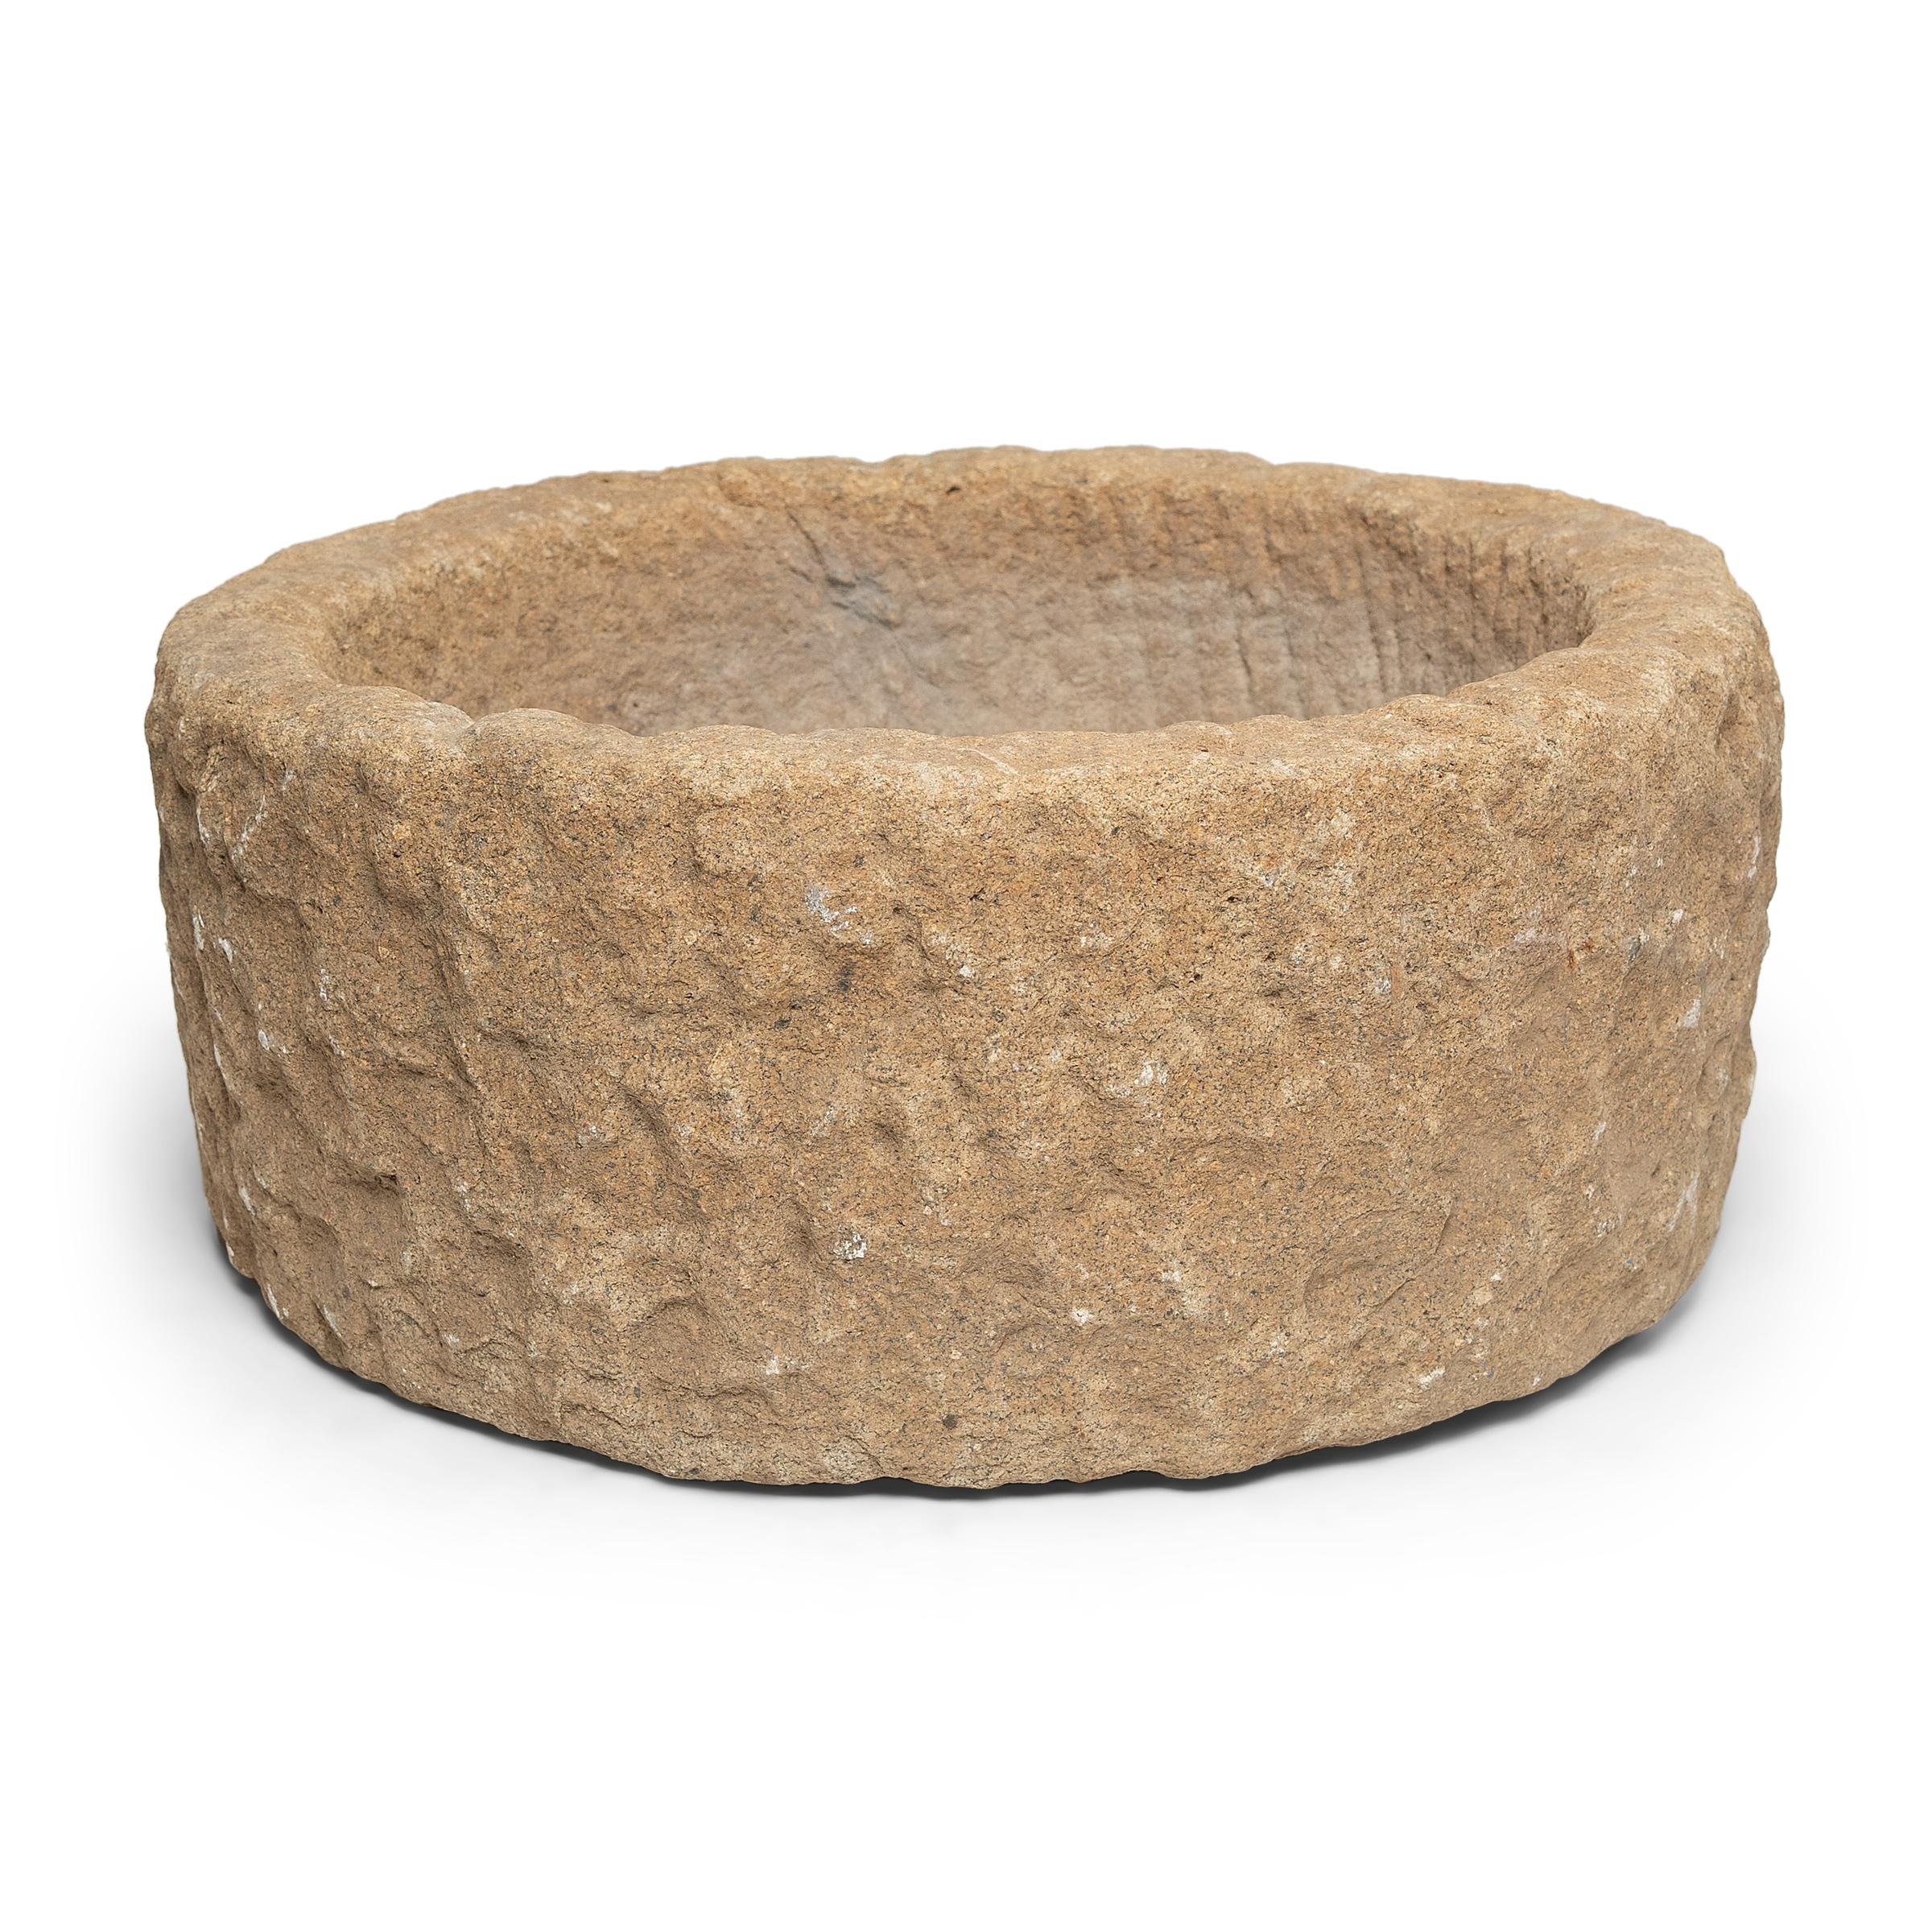 Once used on a provincial Chinese farm to hold water or animal feed, this early 20th-century stone trough is celebrated today for its organic form and rustic authenticity. Hand-carved from solid limestone, the trough has a cylindrical form with